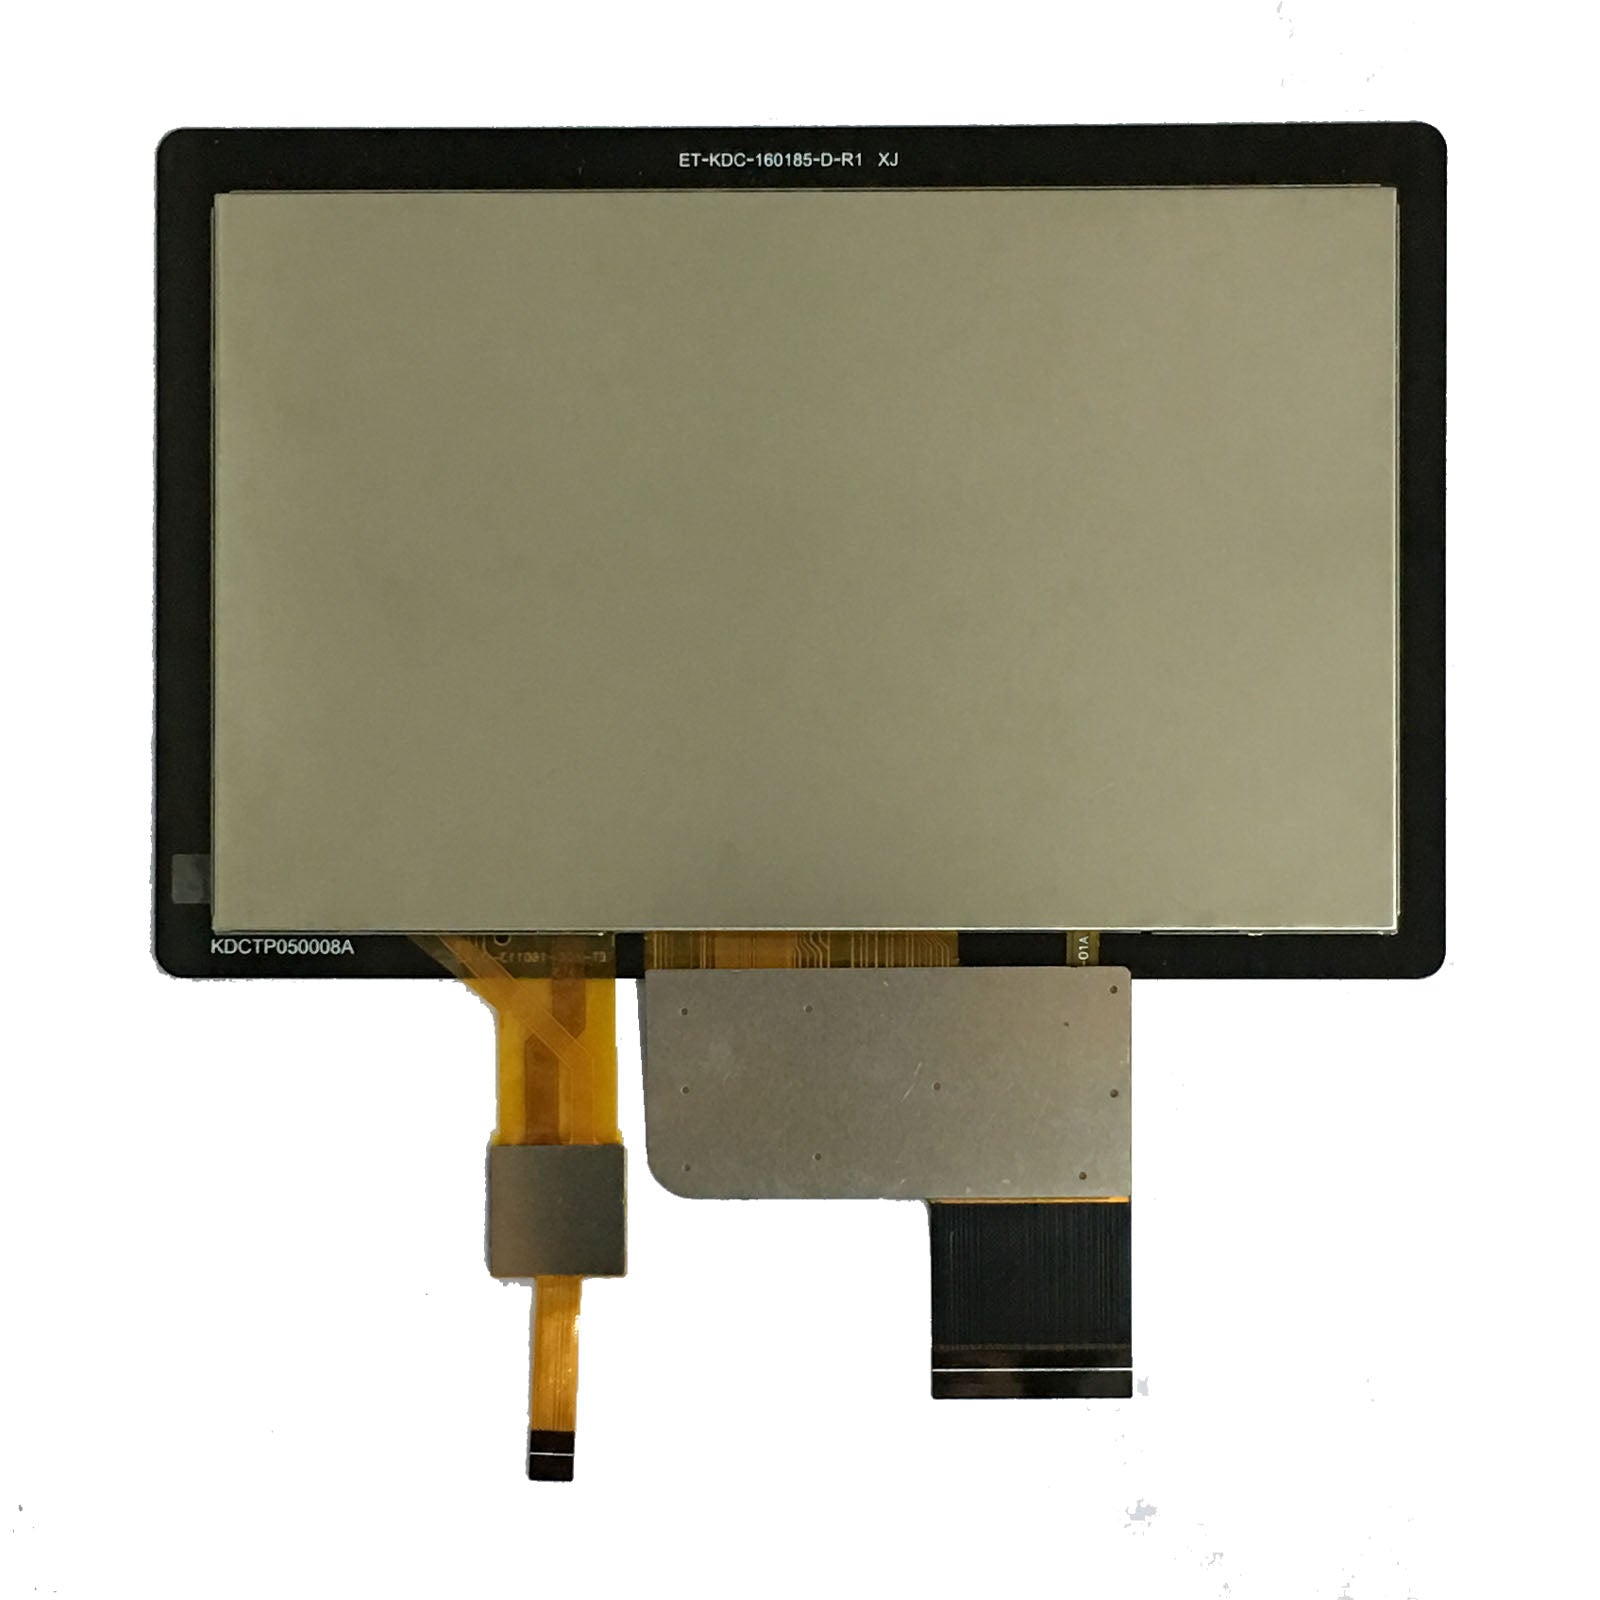 back of 5.0-inch IPS display panel with 800x480 resolution and capacitive touch